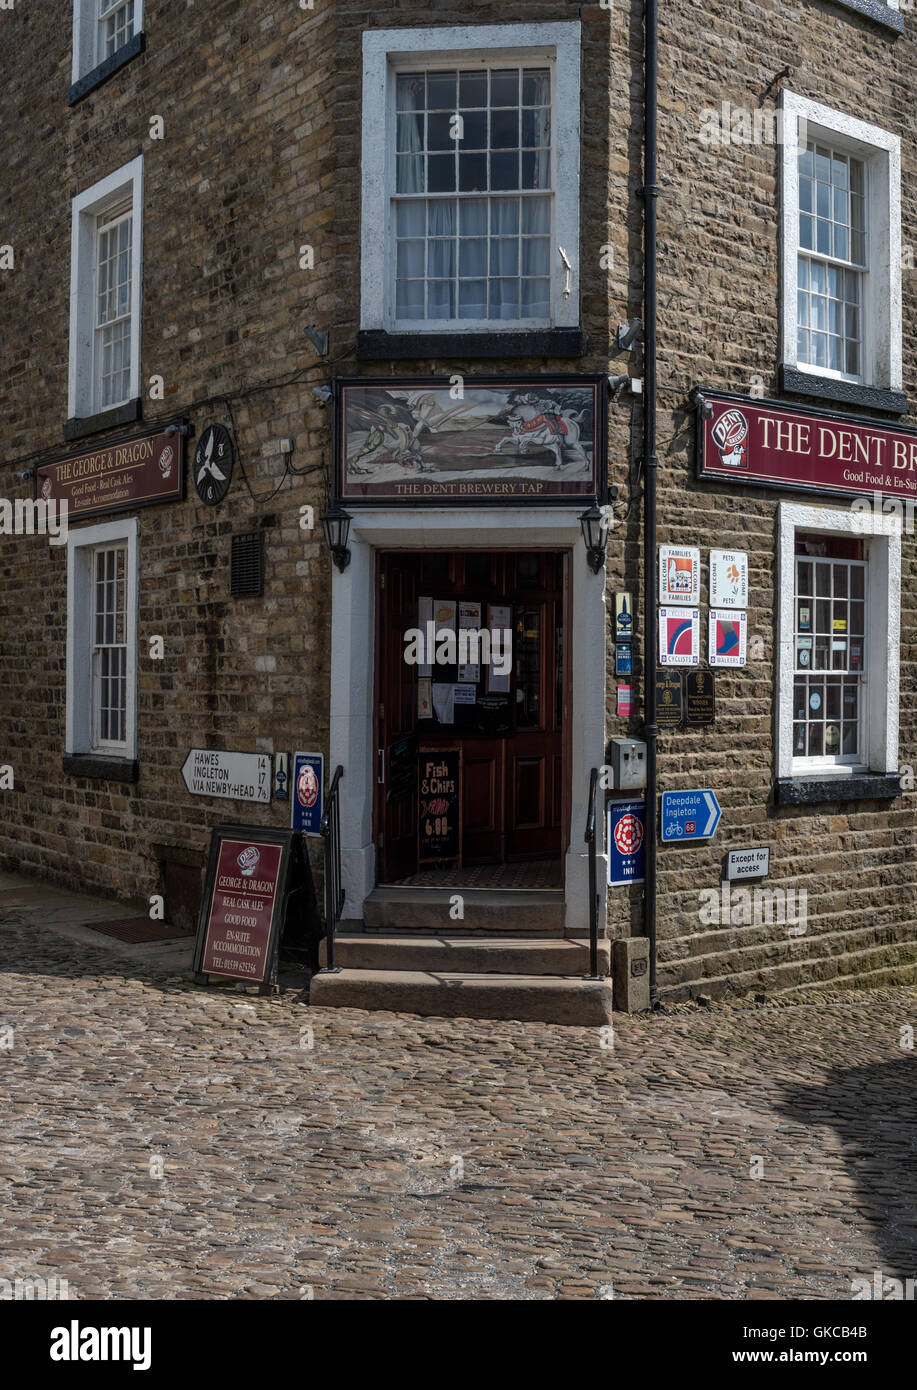 The Dent Brewery Tap at Dent in the Yorkshire dales Stock Photo